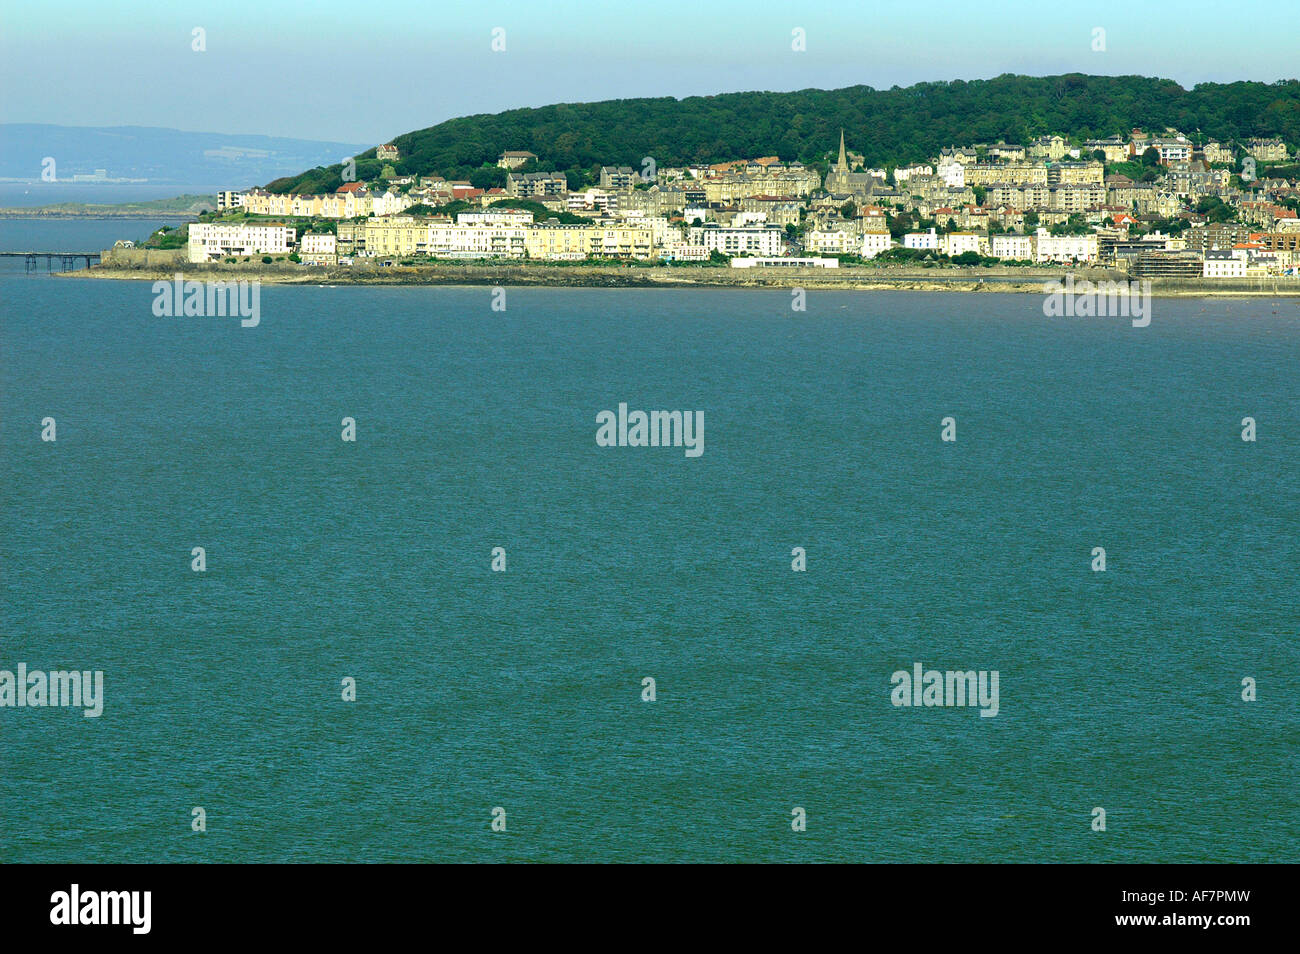 Weston Super Mare seafront, houses on the hillside, bay of Bristol Channel. England Stock Photo